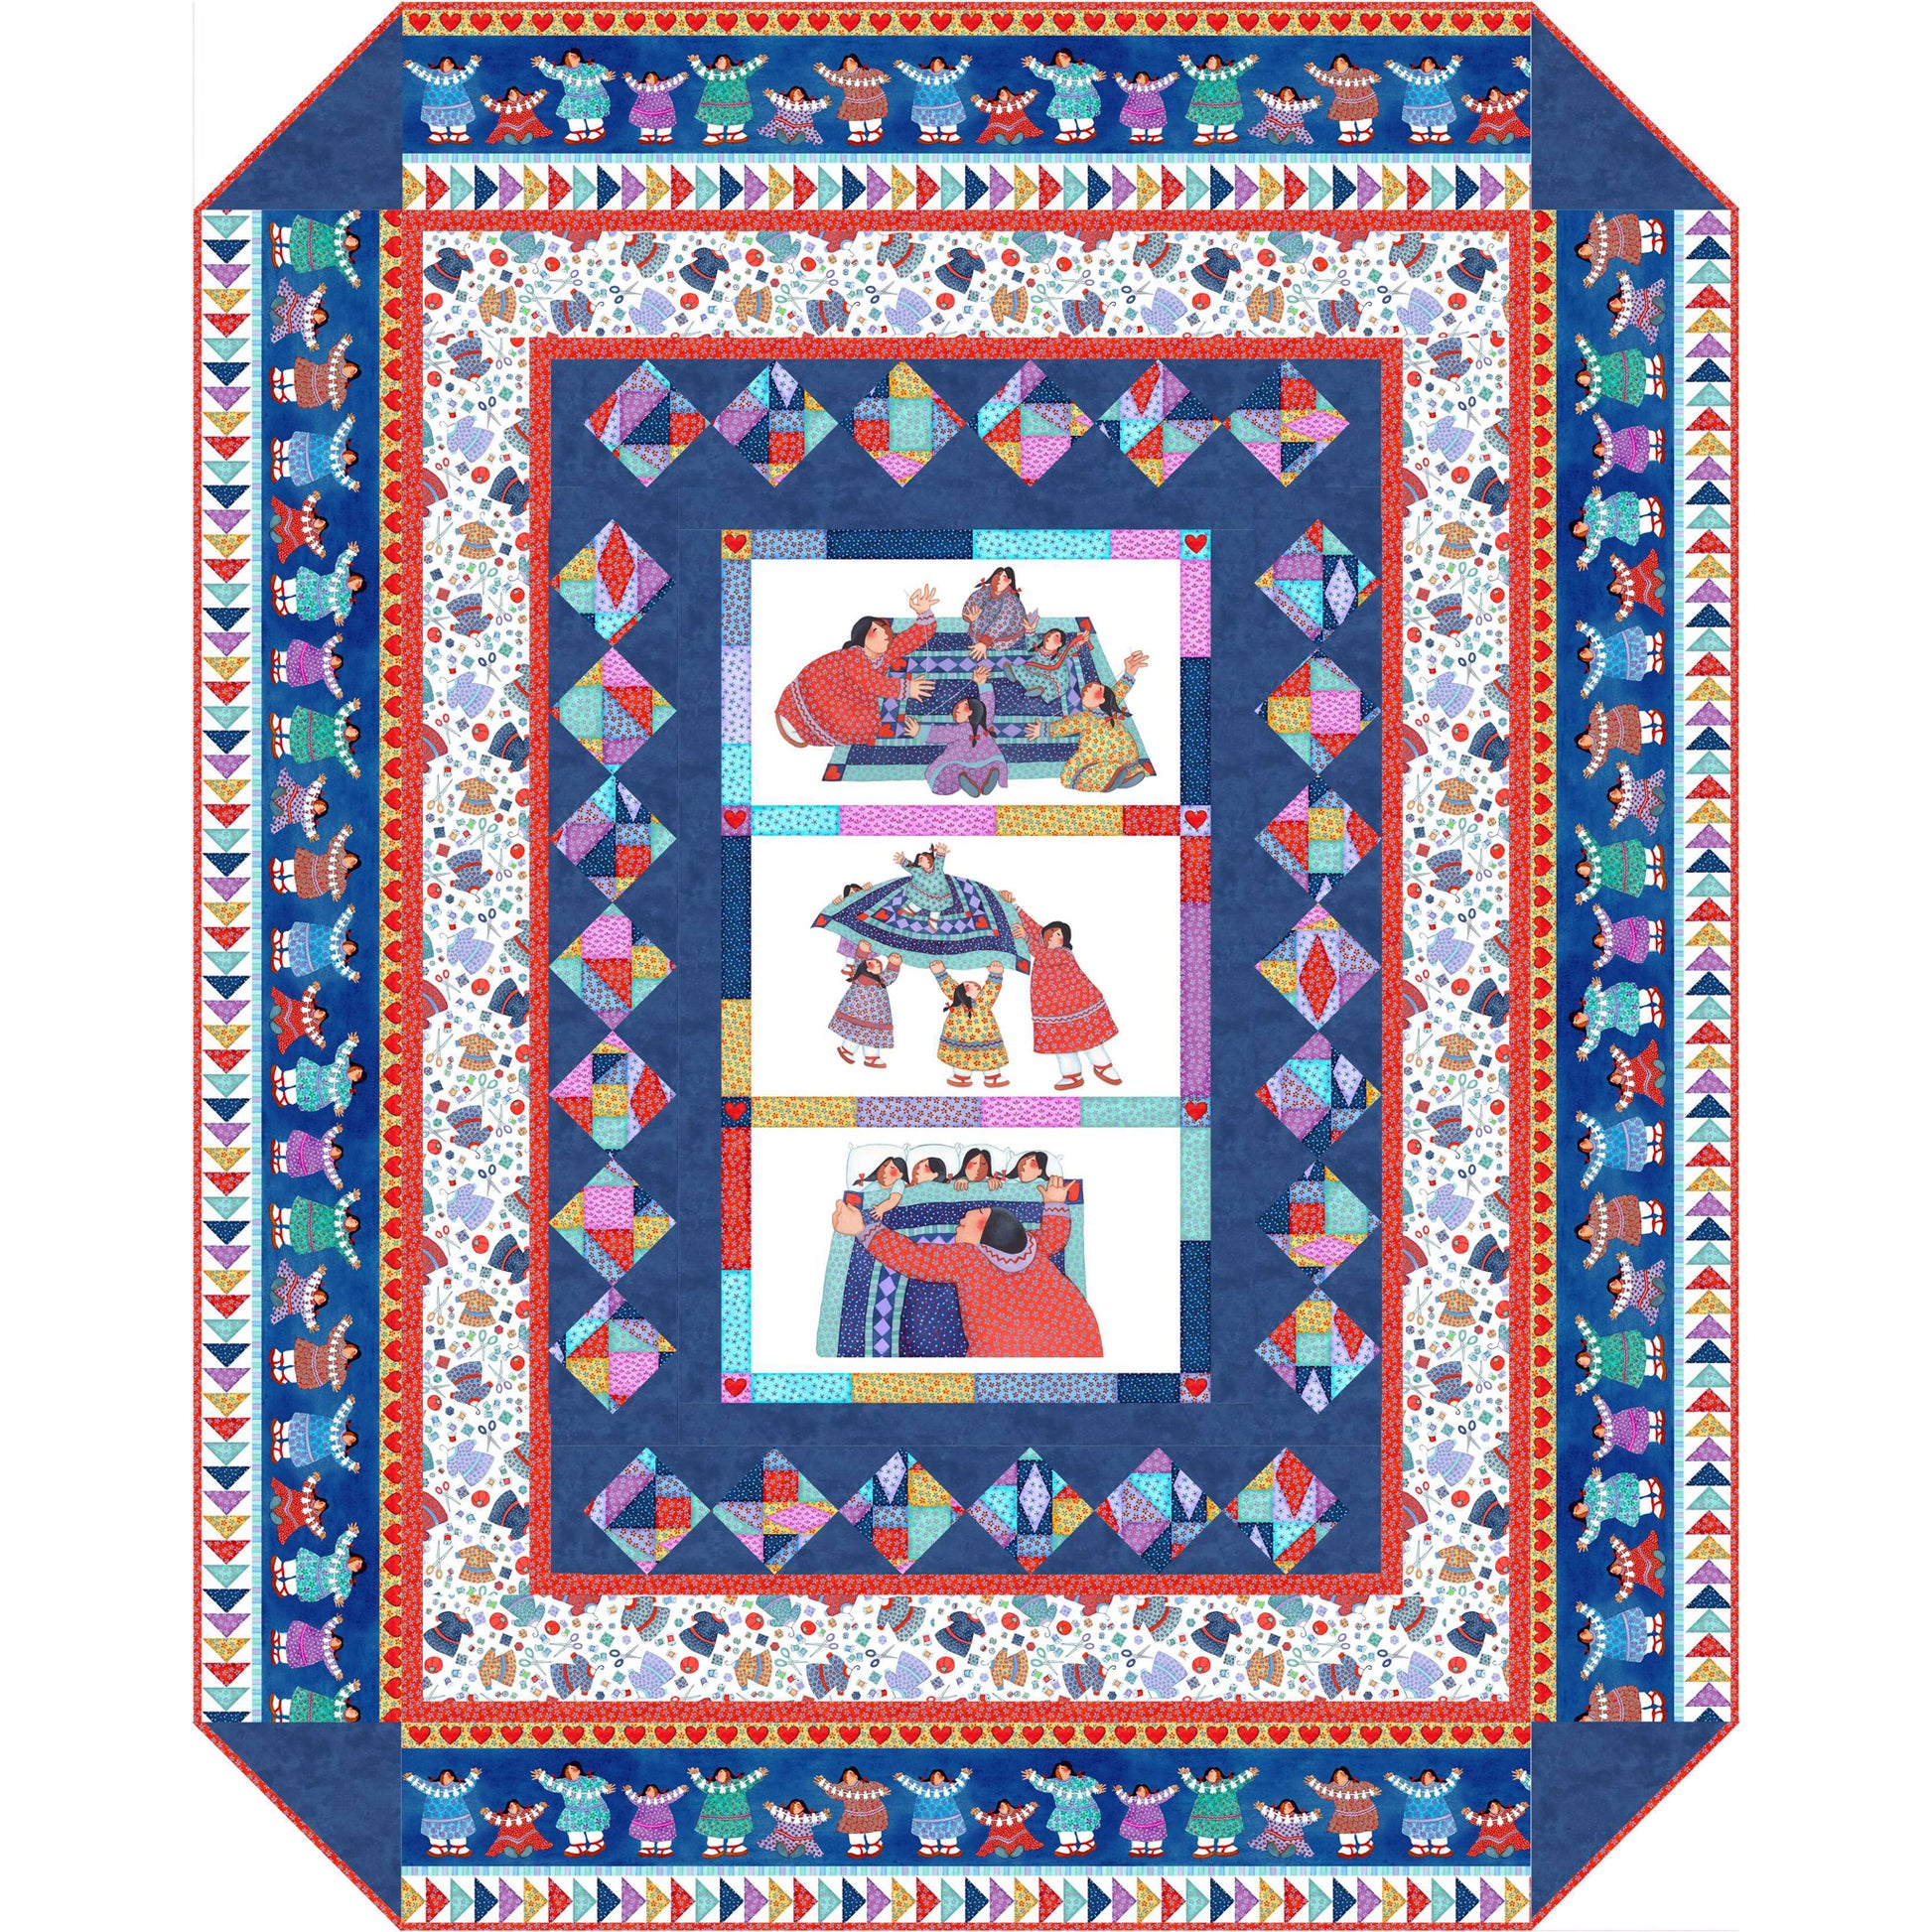 Colorful and fun quilt features panel with three images of mothers and daughter in the middle. Quilt is bordered with colorful diamonds, then fun in between fabric and finished off with row of mothers and daughters and colorful flying geese block border.